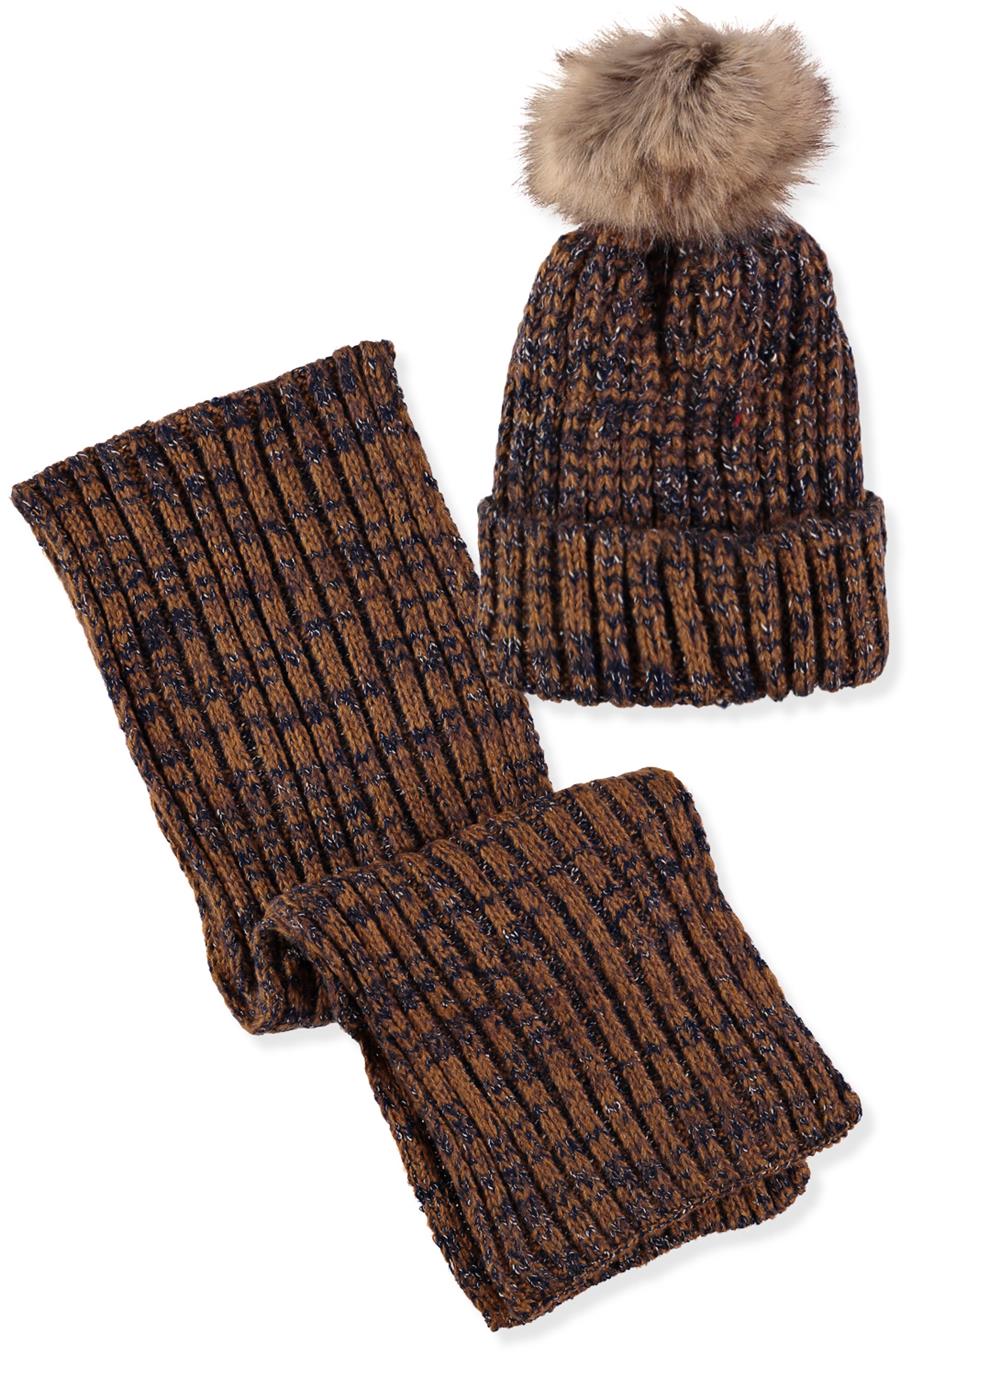 Connex Gear Womens Marled Cable Knit Hat and Scarf 2-Piece Set